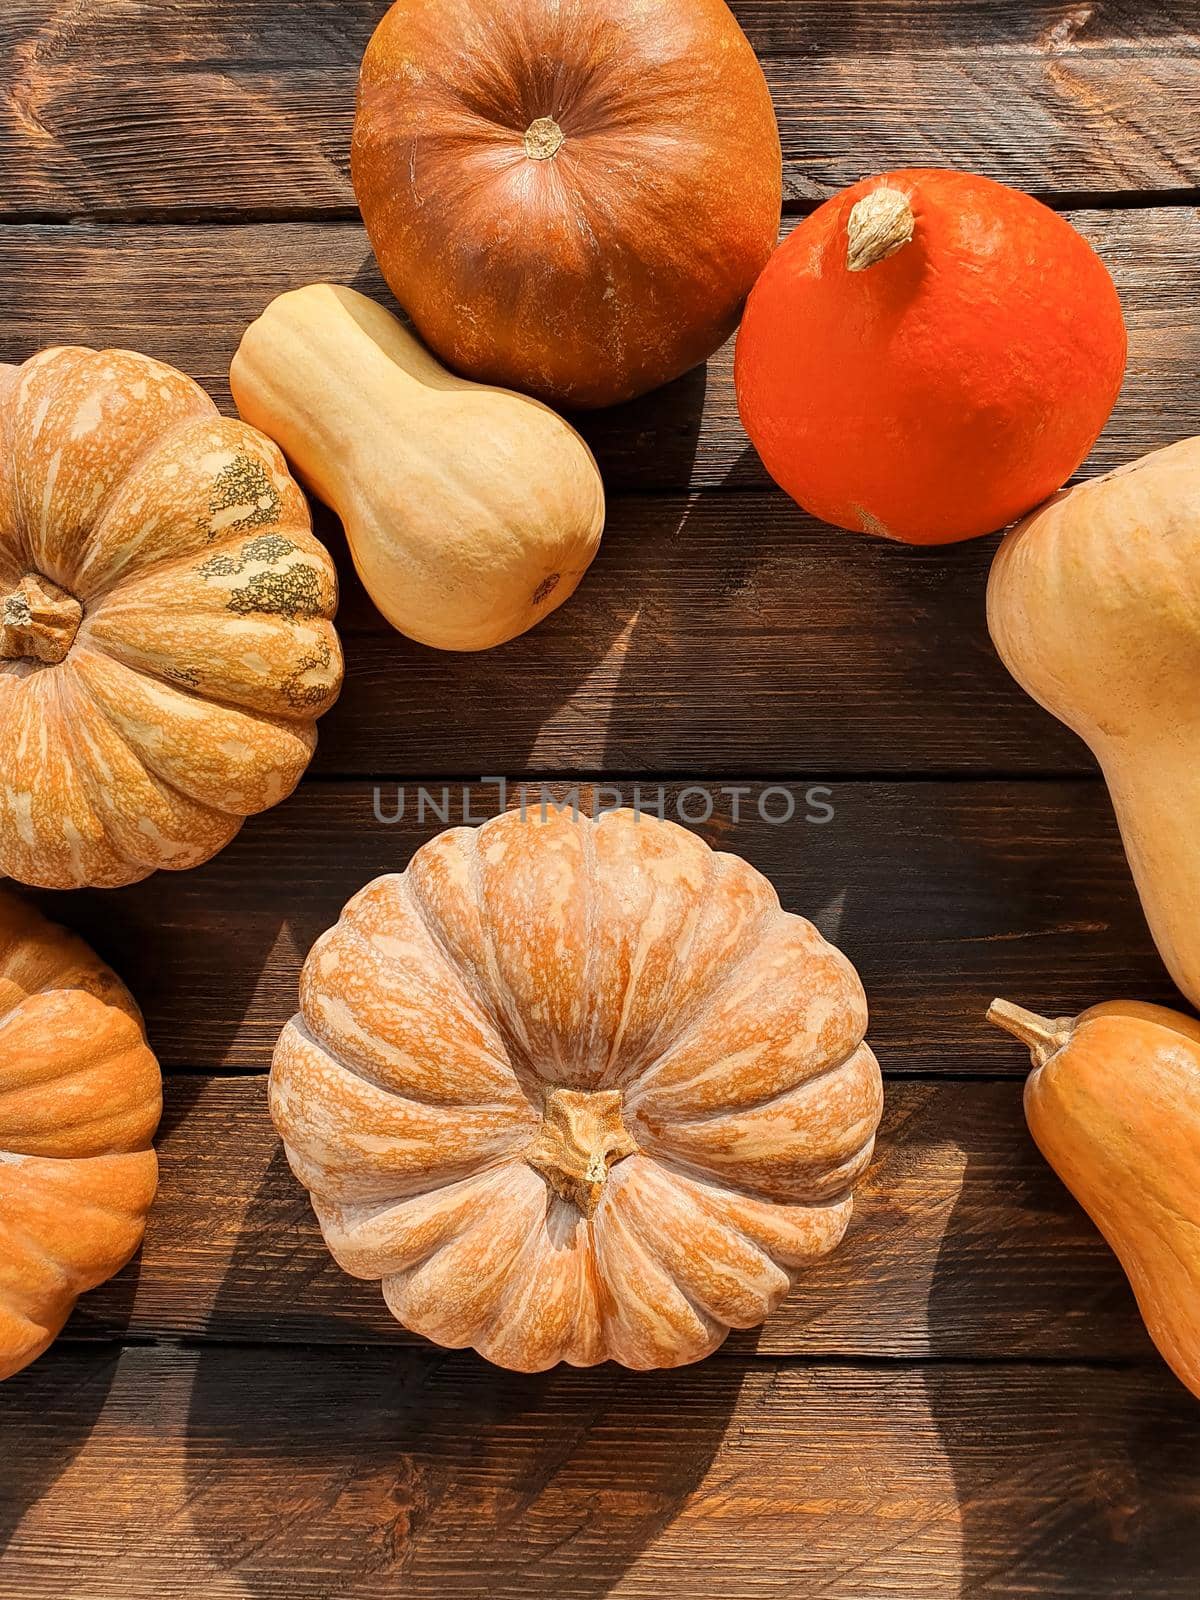 There are various pumpkins on the wooden table. High quality photo